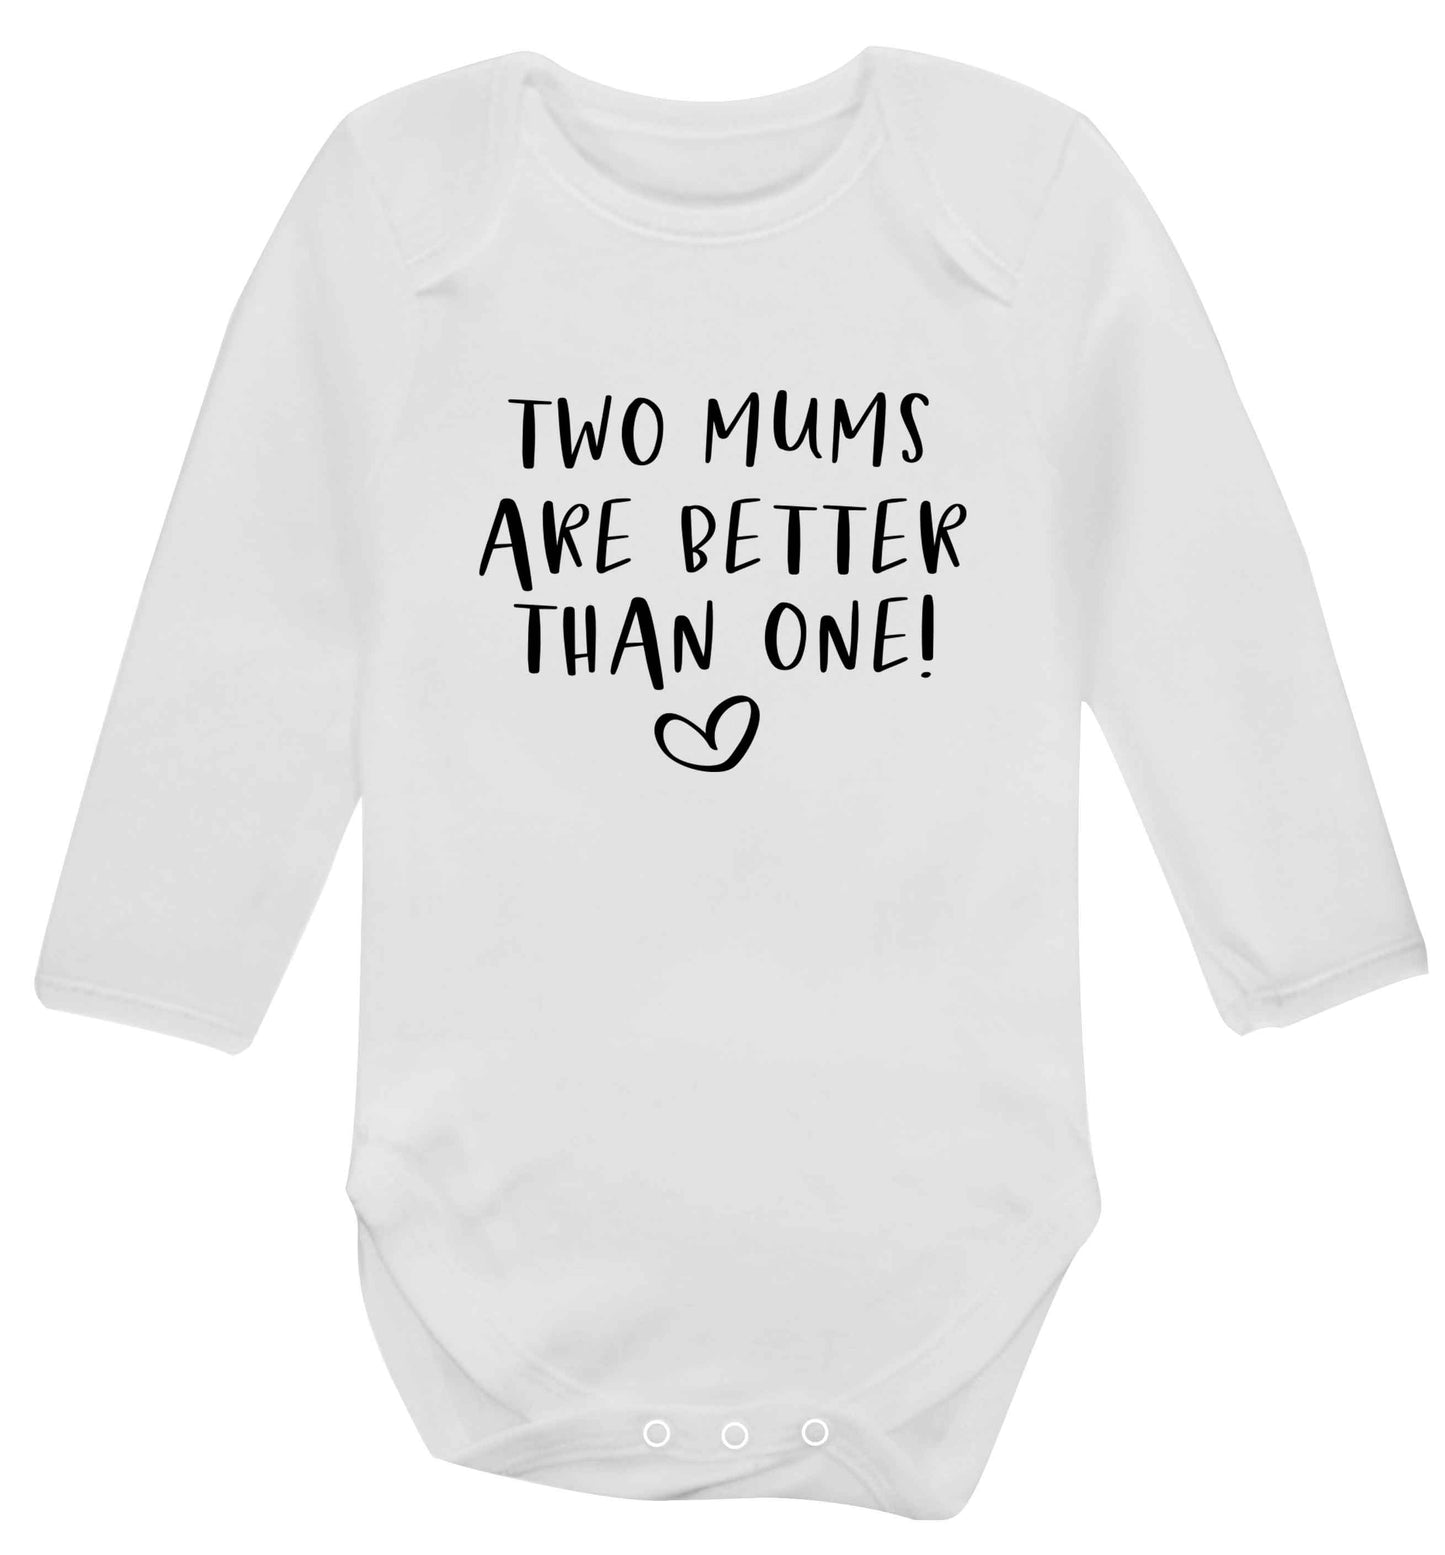 Two mums are better than one baby vest long sleeved white 6-12 months